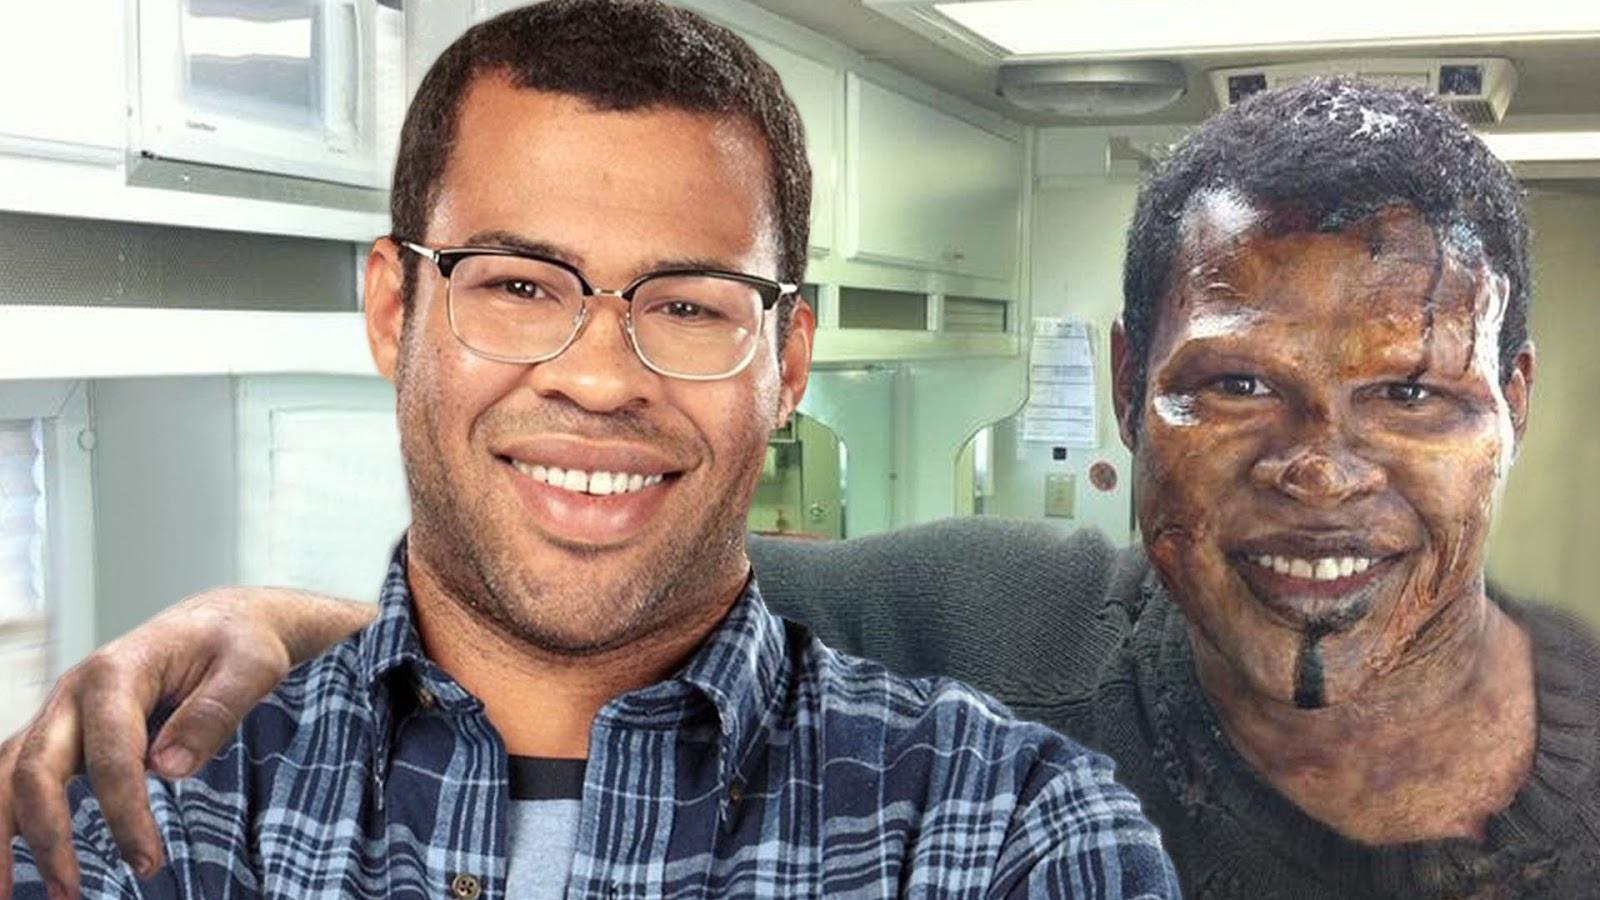 Jordan Peele Becomes First Black Director To Break $100M On Feature